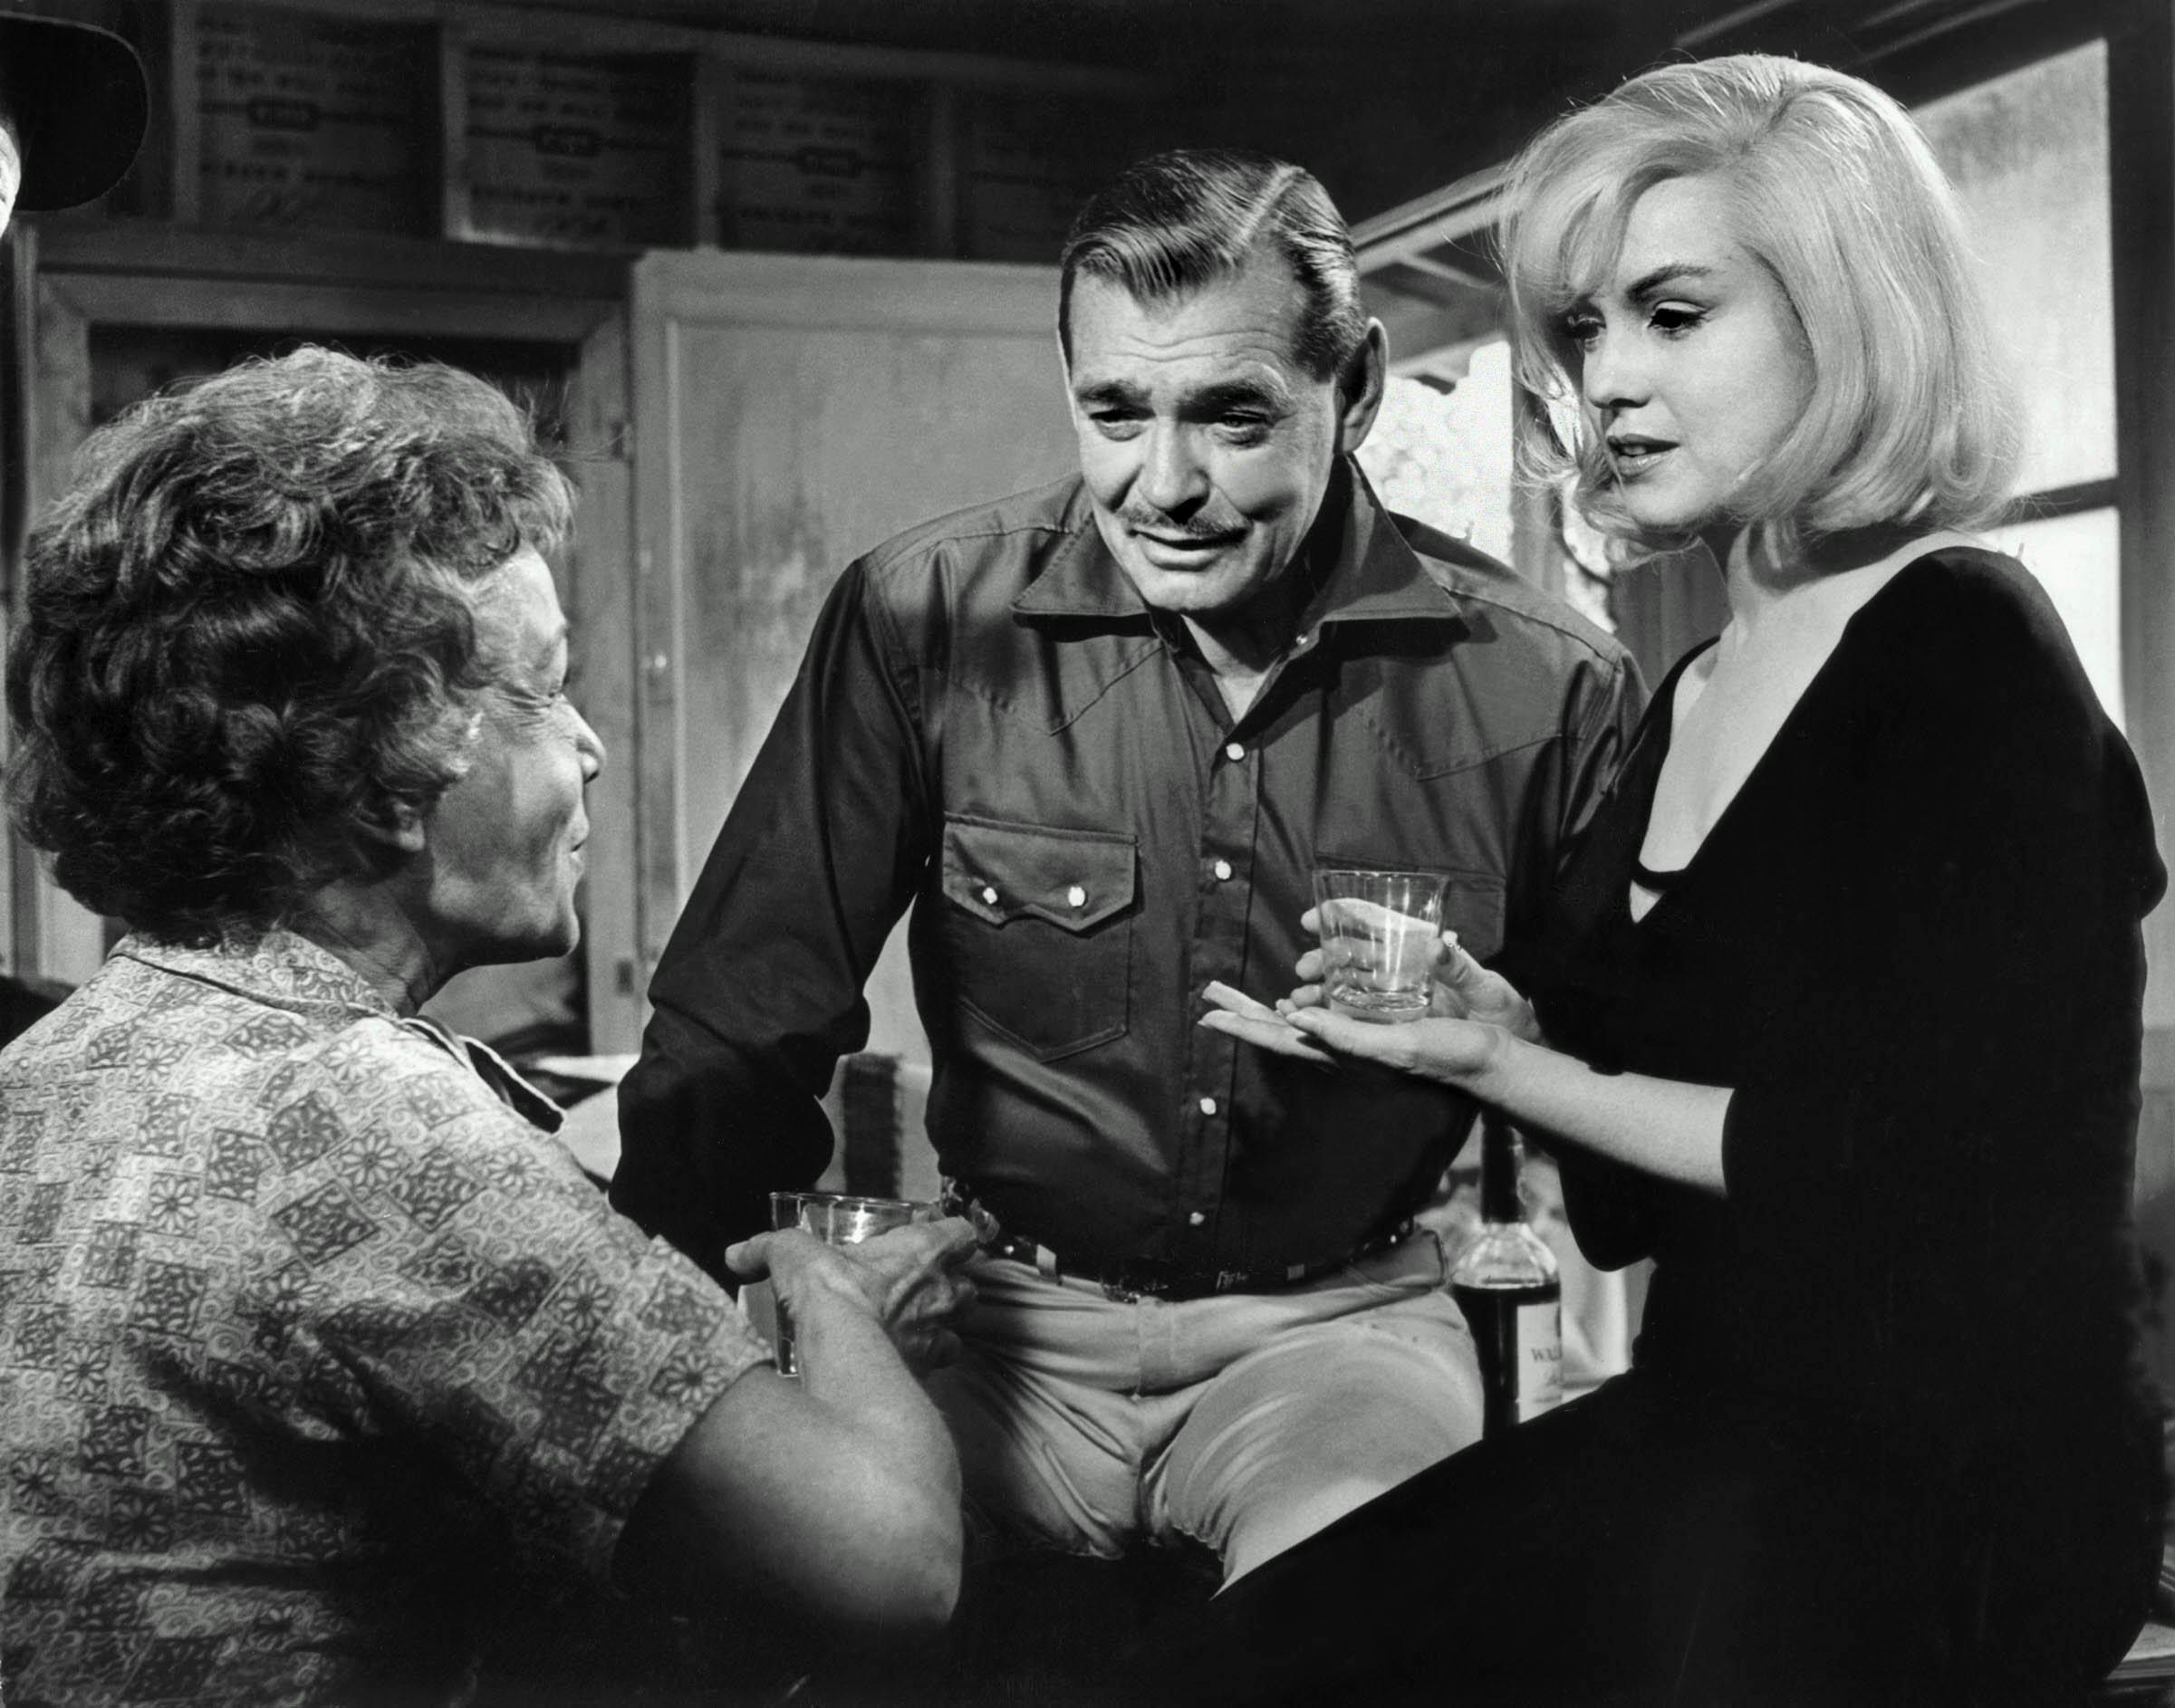 Clark Gable and Marilyn Monroe on set in “The Misfits”